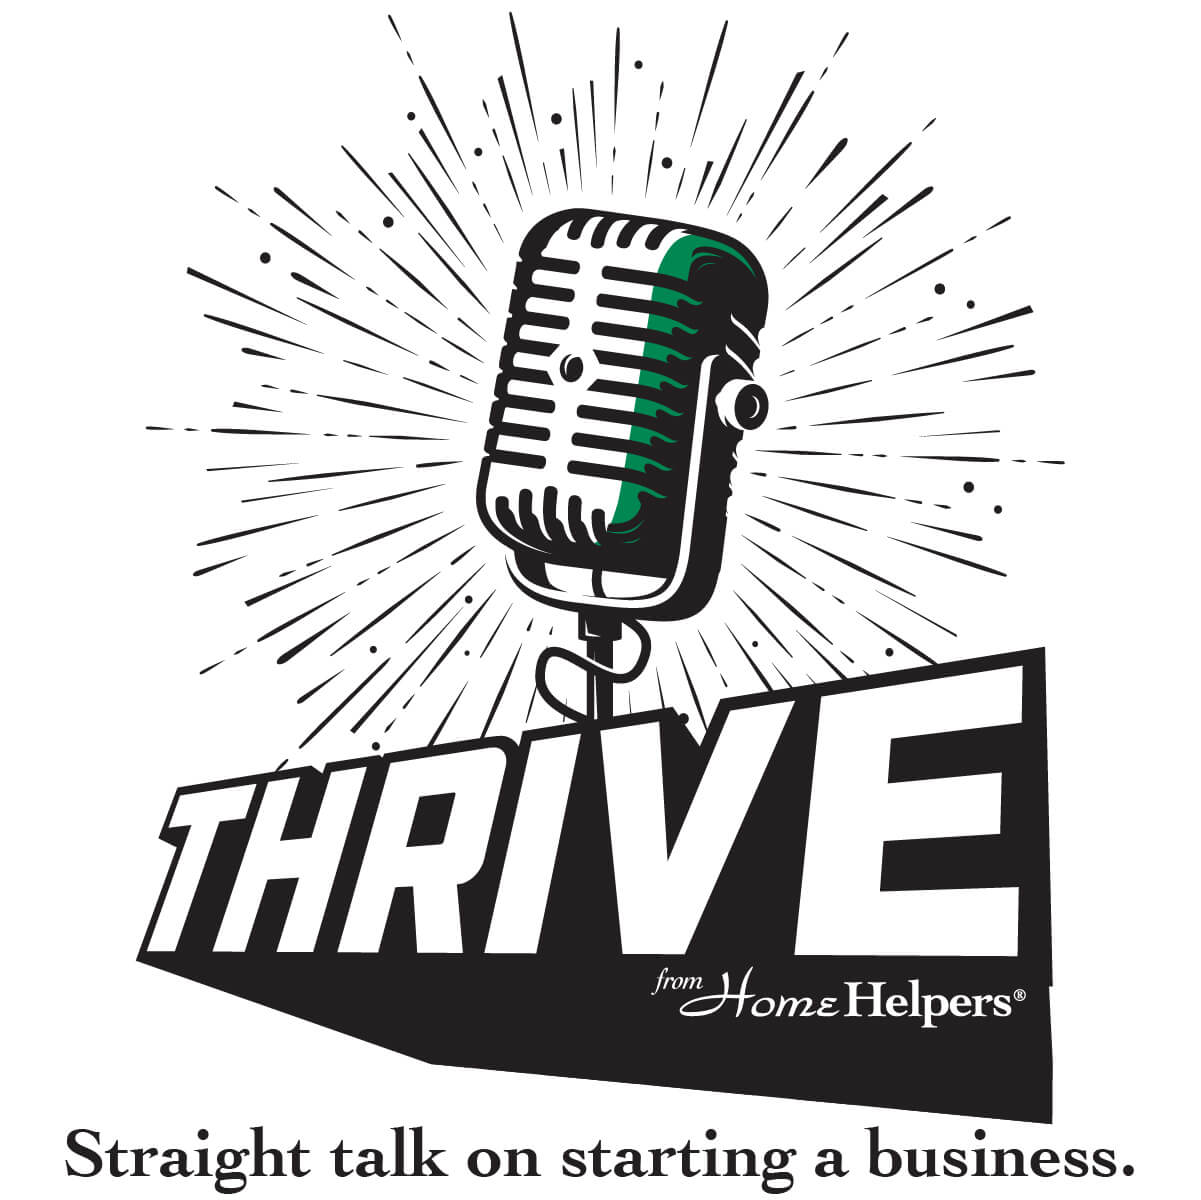 Thrive podcast logo - Straight talk on starting a business